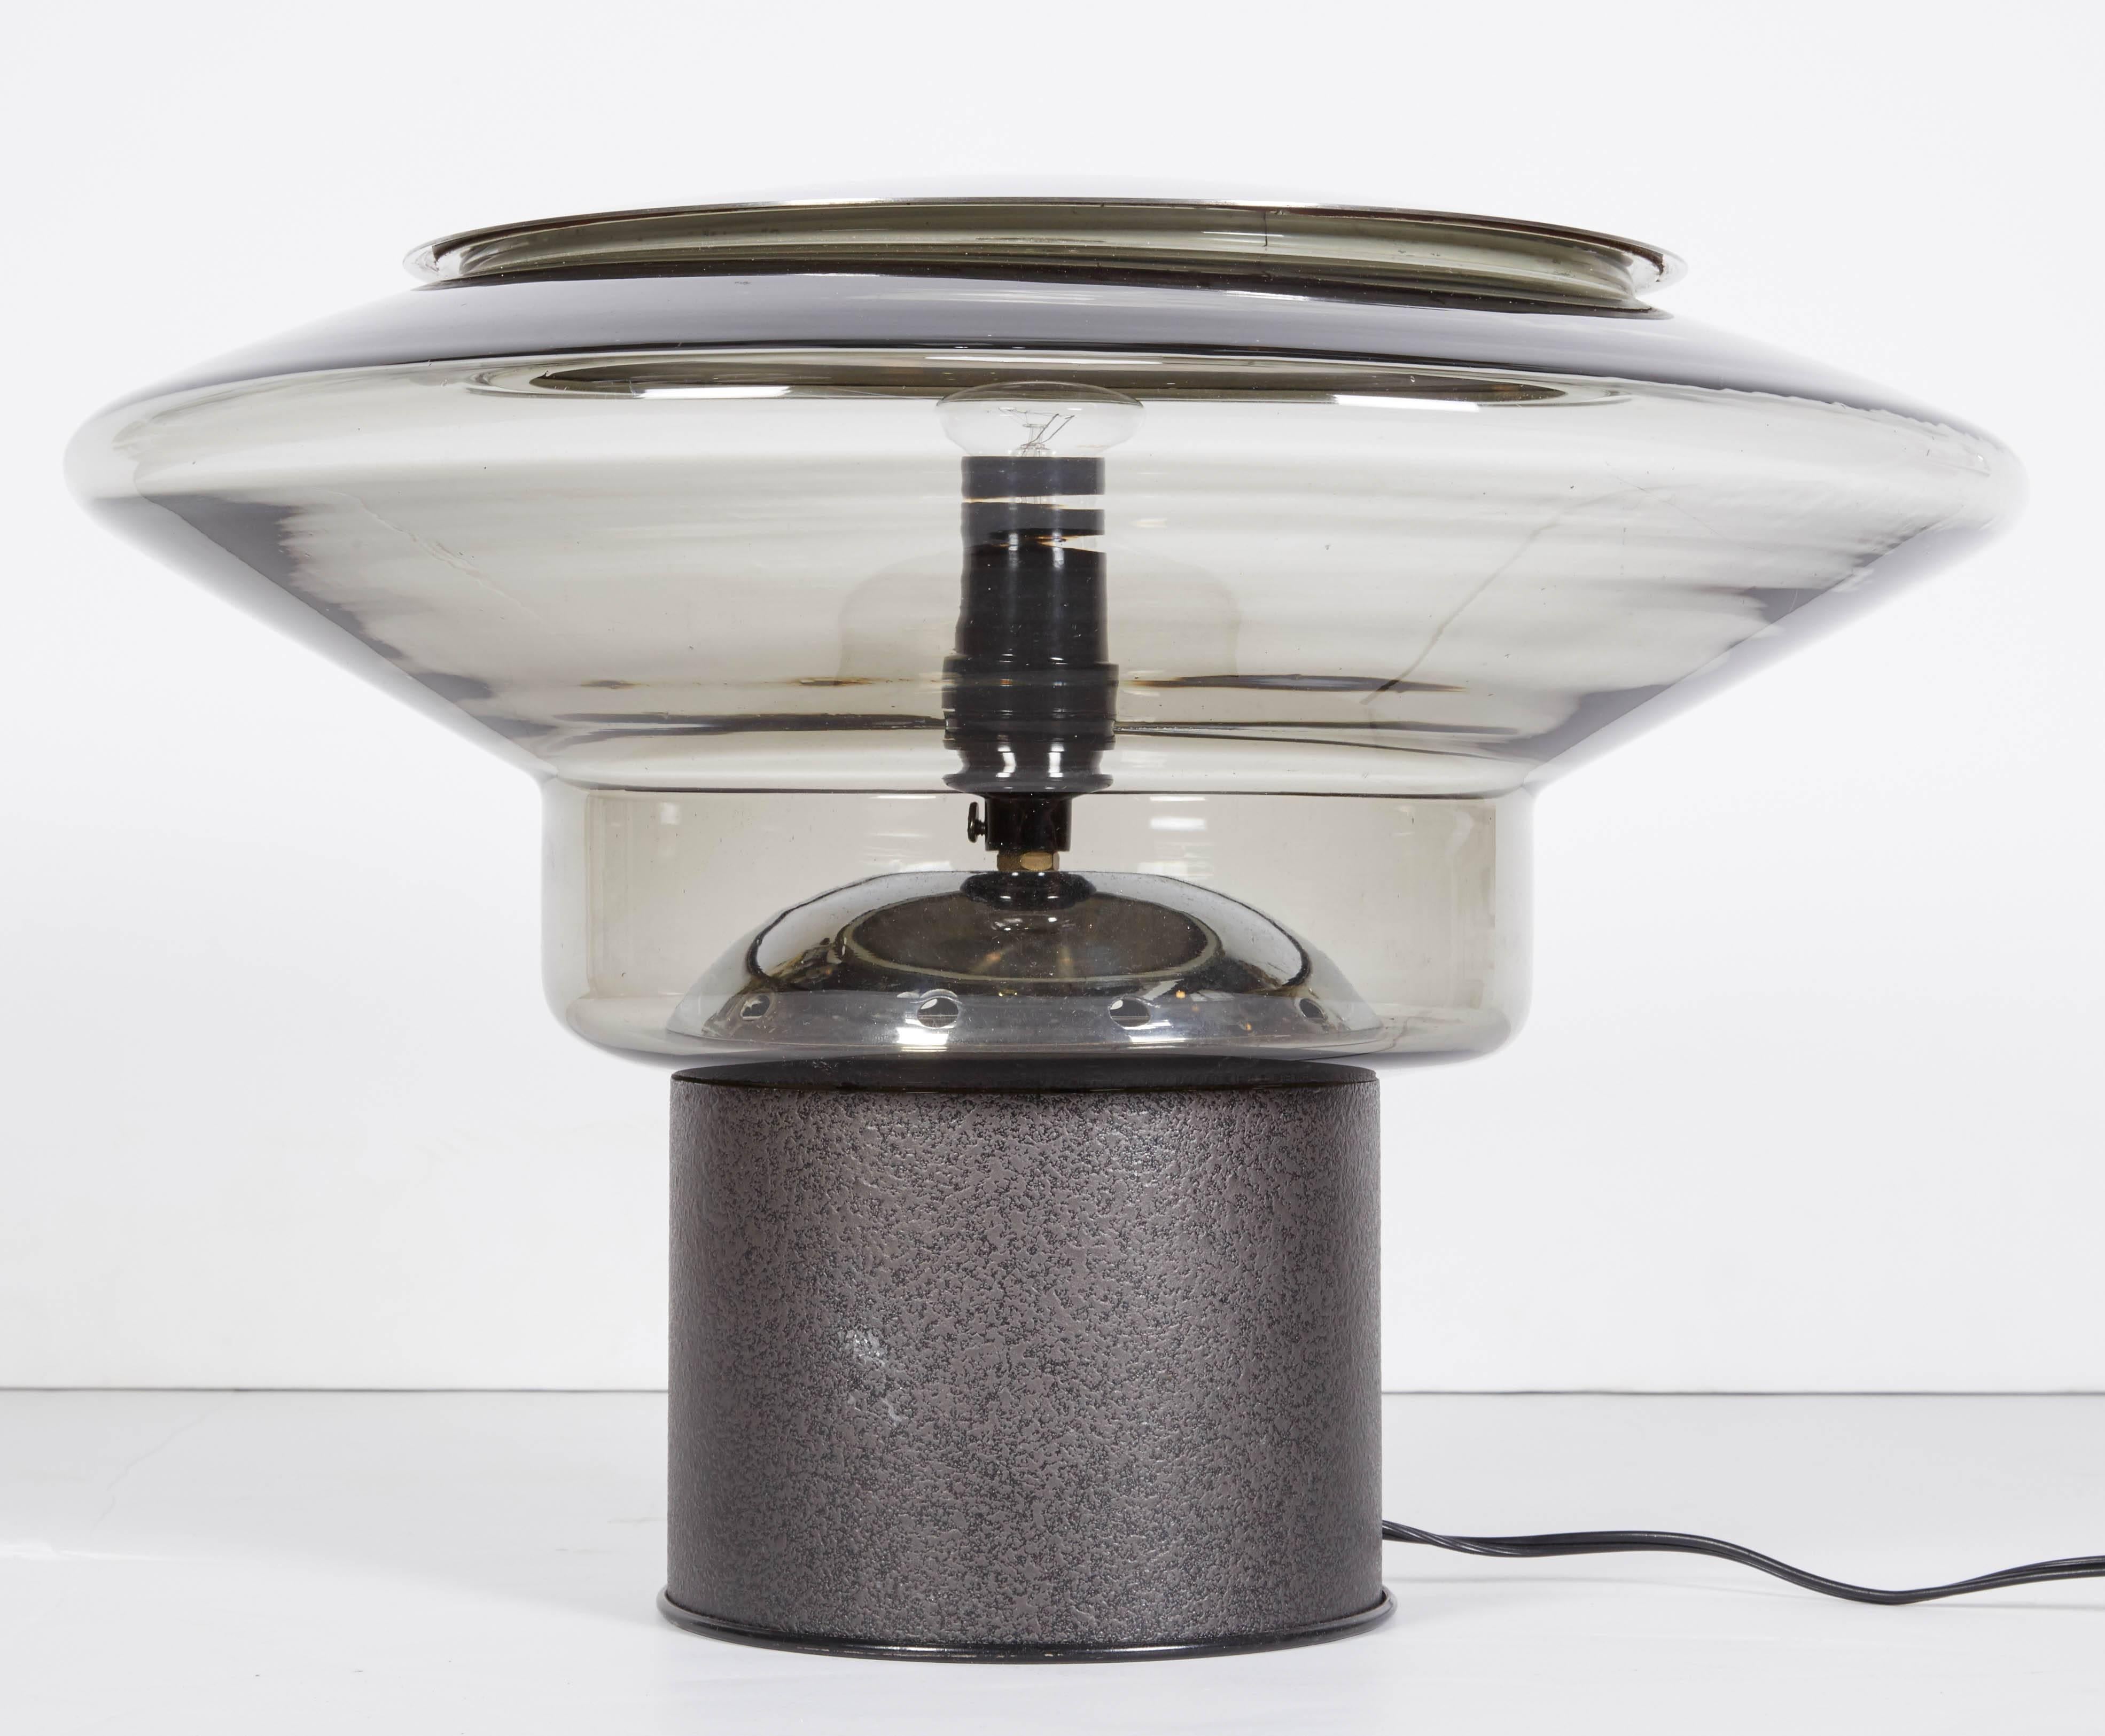 A statement piece of Italian modern design, circa 1970. This table lamp is a sculpture in glass, metal and light in table lamp form. The large shade is handblown Murano glass in pale grey. It rests securely atop a charcoal grey black textured enamel